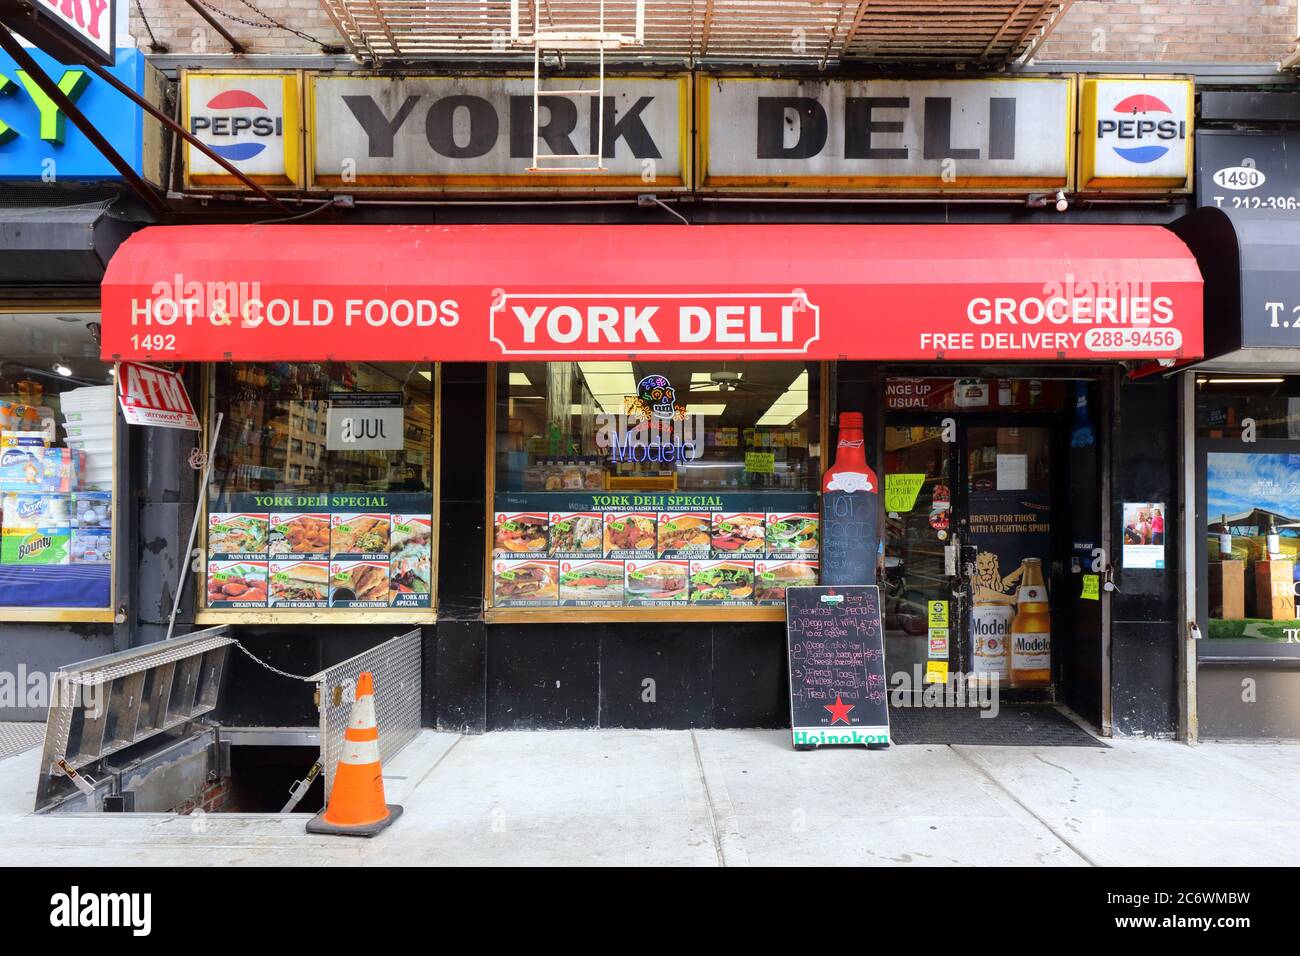 York Delicatessen, 1492 York Ave, New York, NYC storefront photo of a grocery store, deli, in the Upper East Side neighborhood of Manhattan. Stock Photo